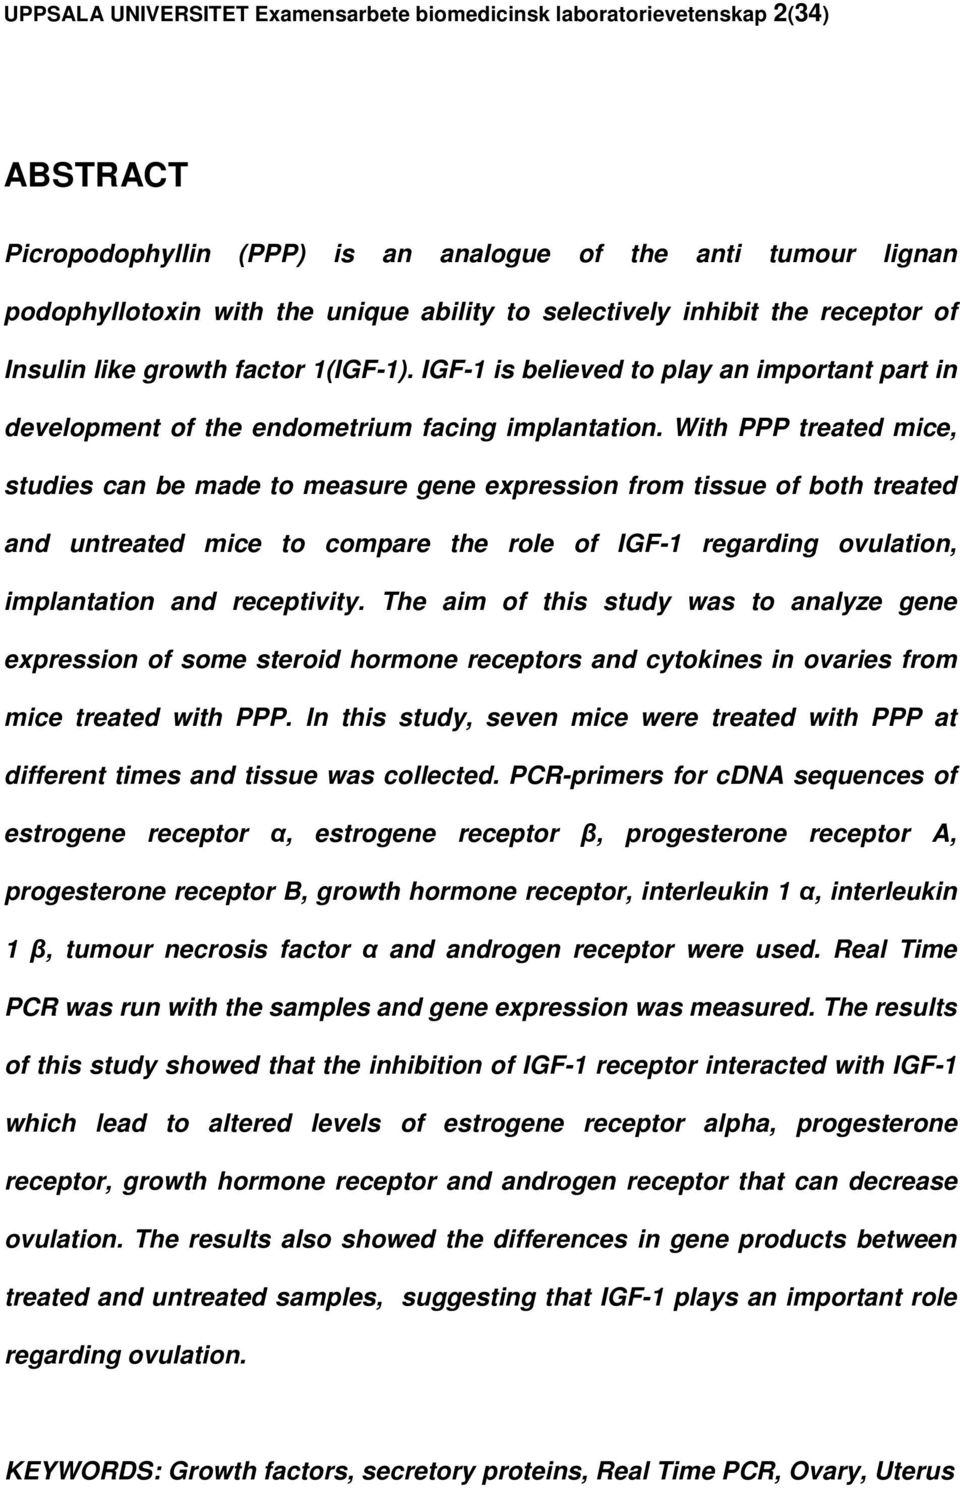 With PPP treated mice, studies can be made to measure gene expression from tissue of both treated and untreated mice to compare the role of IGF-1 regarding ovulation, implantation and receptivity.